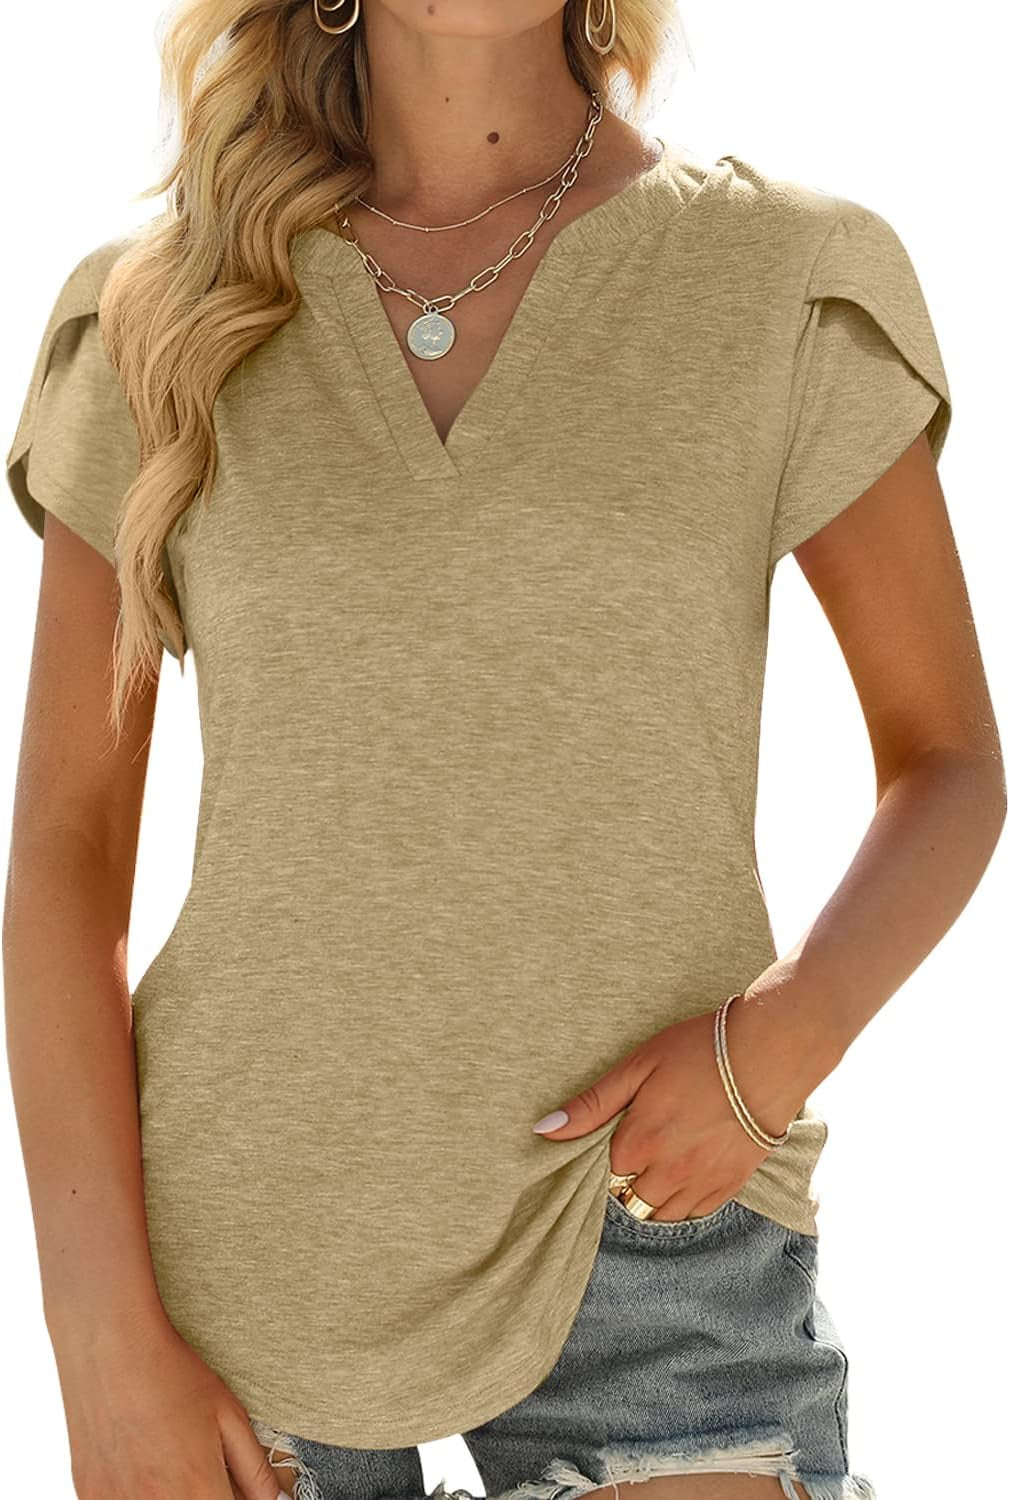 Womens Tops V Neck Ruffle Short Sleeve Tshirts Tunic Summer Business Casual Tops Blouses for Women